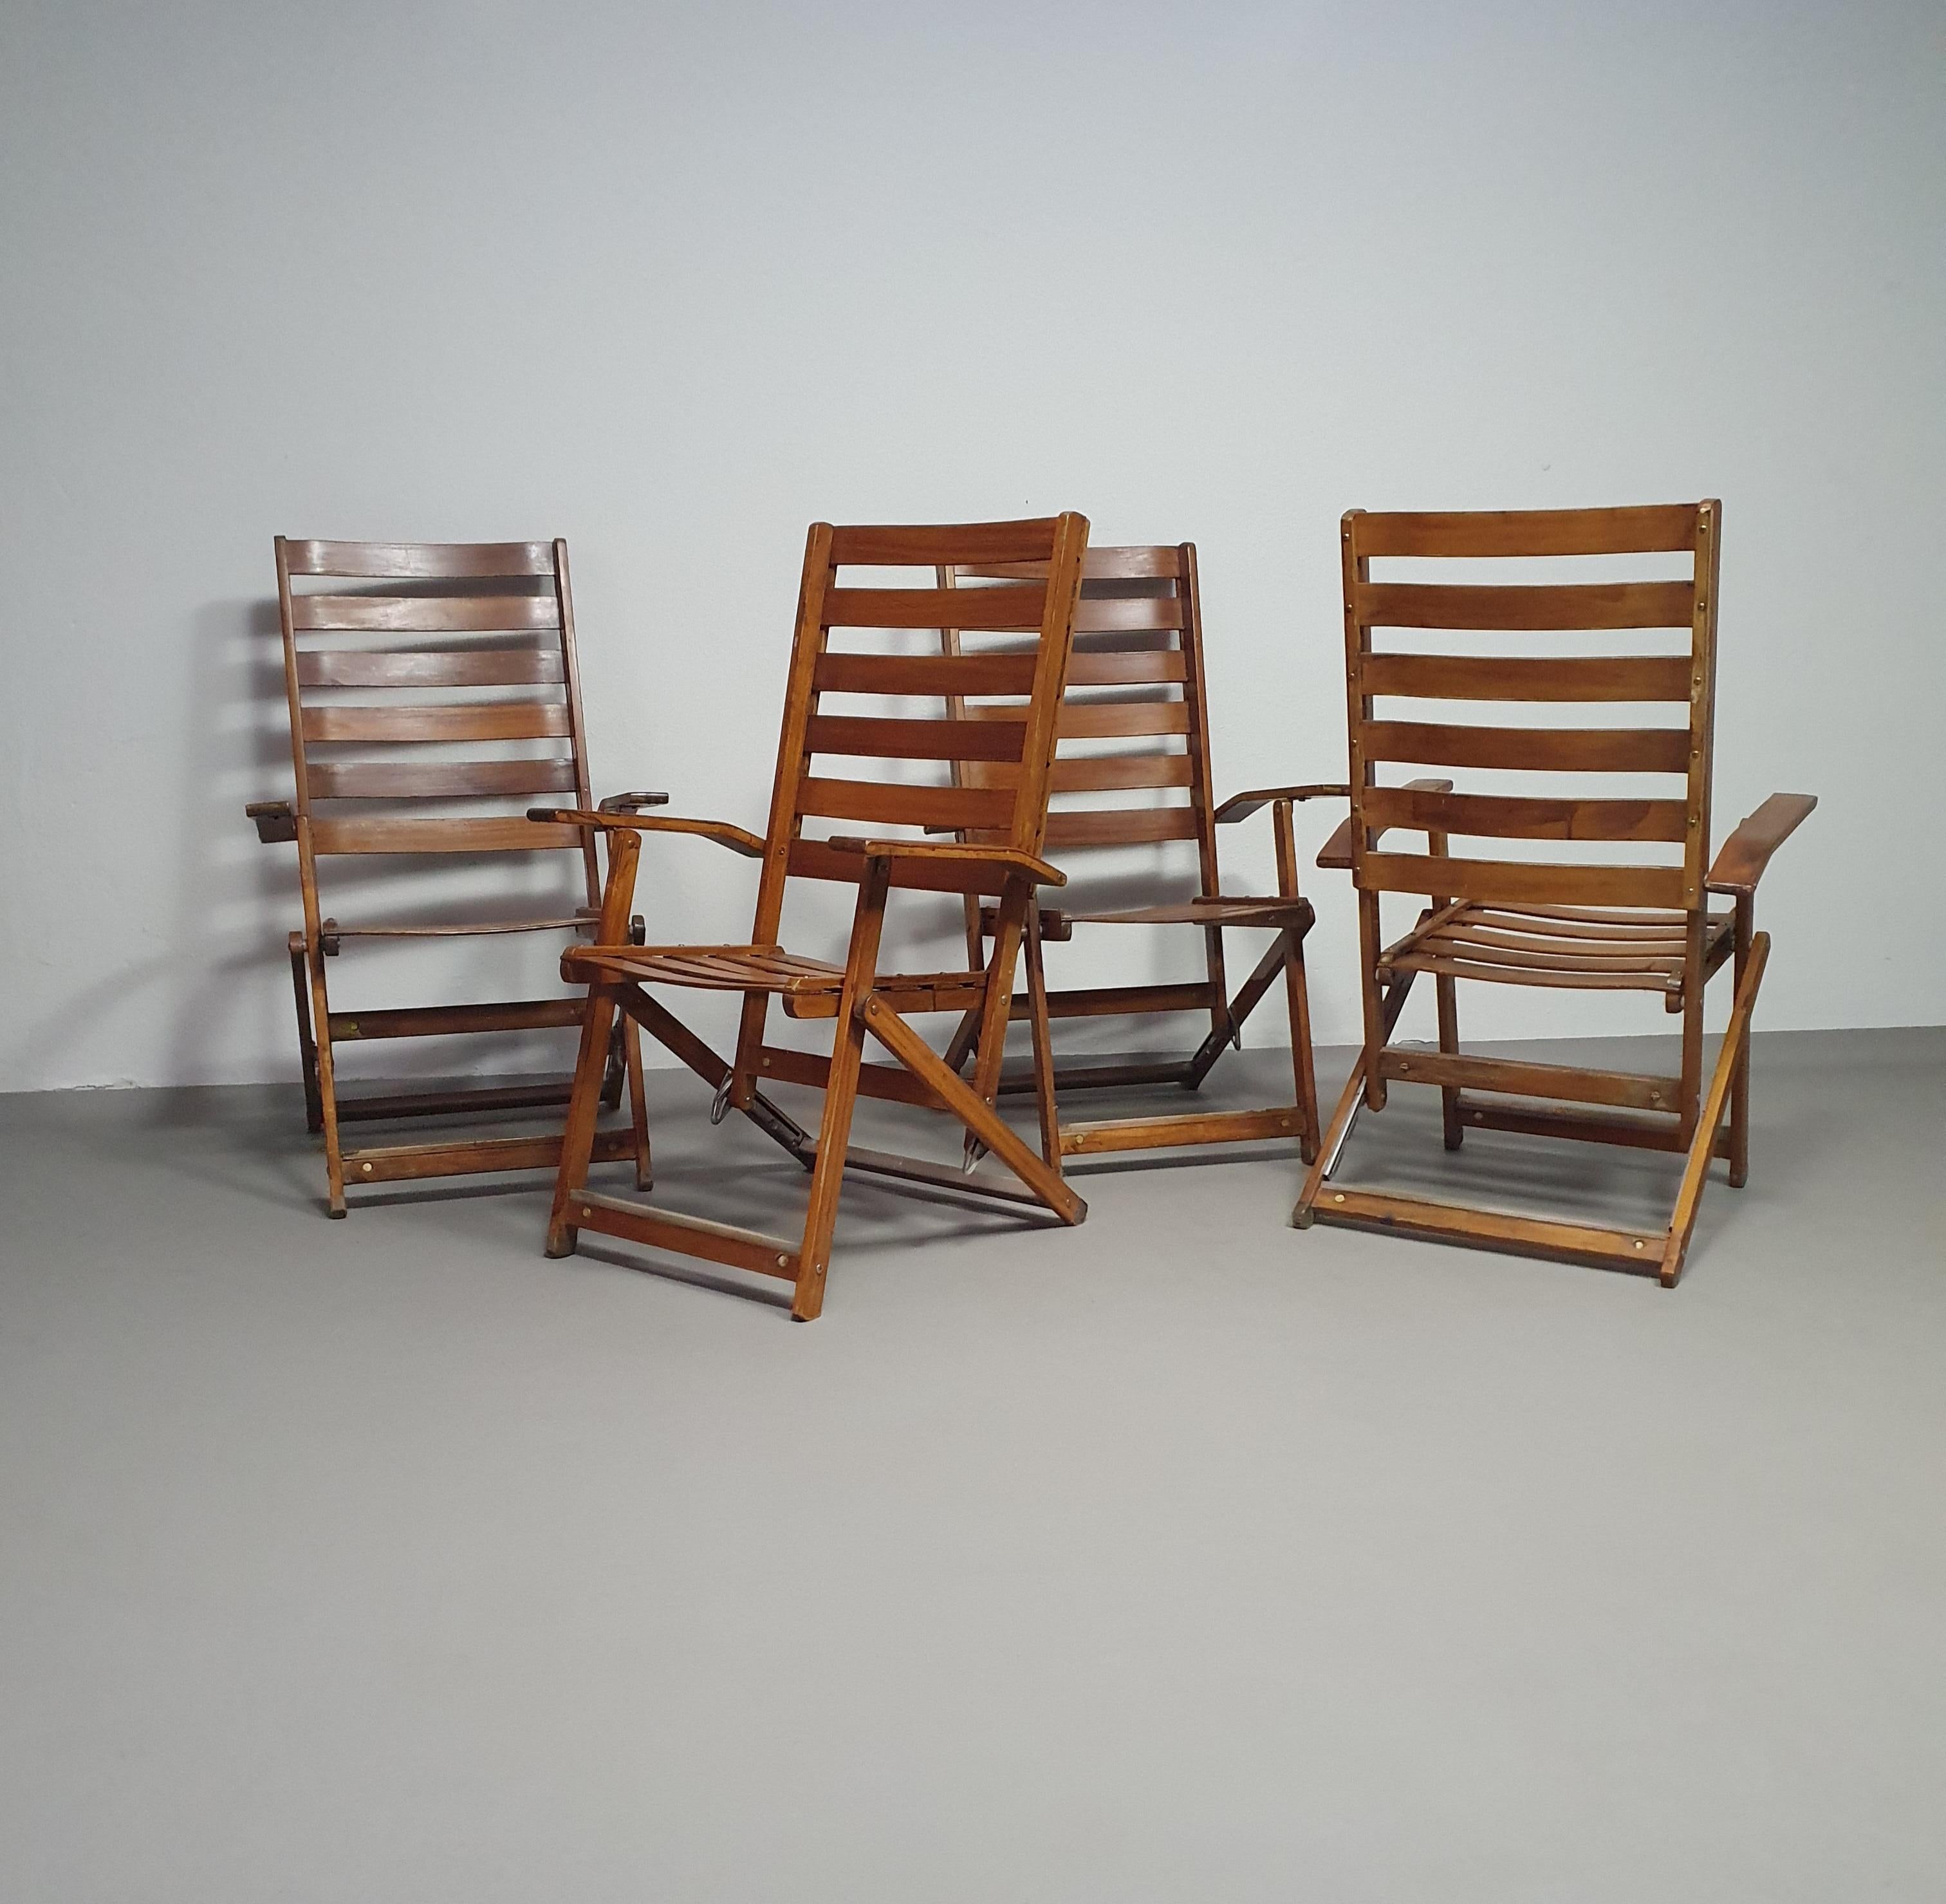 Declining Folding seating set by Ico Parisi by Fratelli Reguitti.

4 x Reclining and folding armchairs / table manufactured by Fratelli Reguitti and designed by Ico Parisi, mid-1960s

Made of beech wood, it measures 103 cm in height, 63 cm in width,